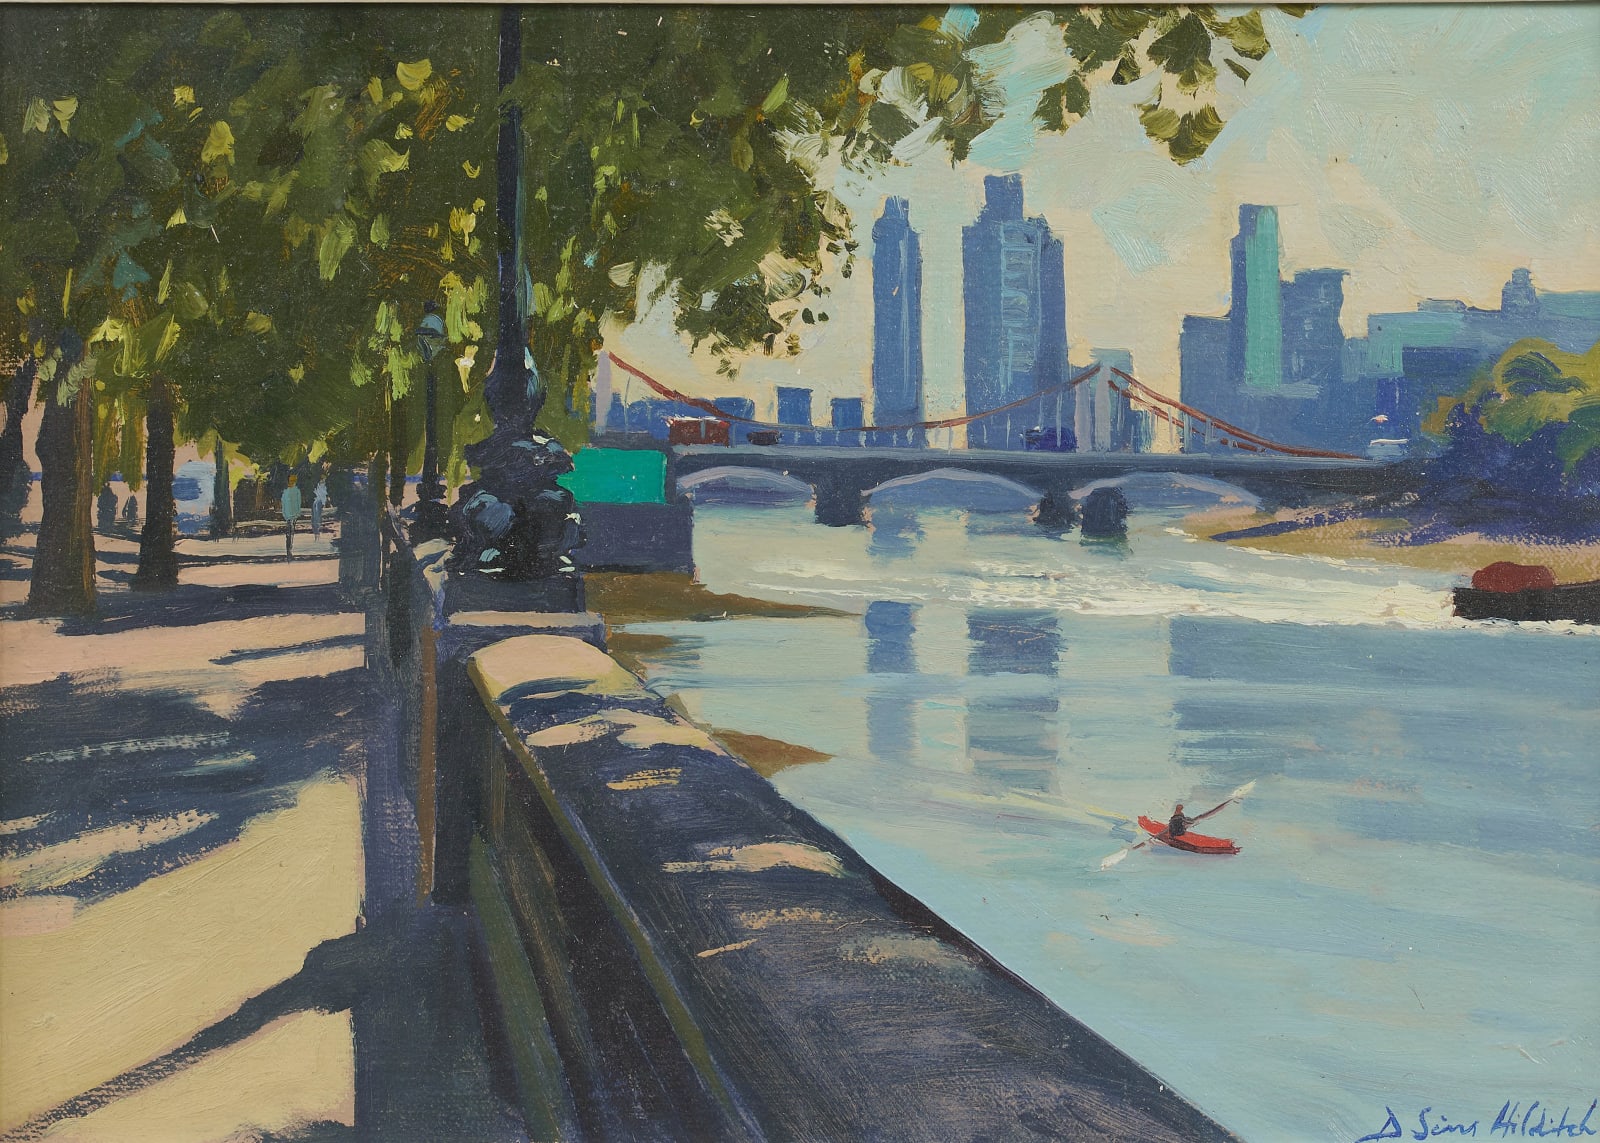 Daisy Sims Hilditch, Canoeing on the Thames, Chelsea 2022